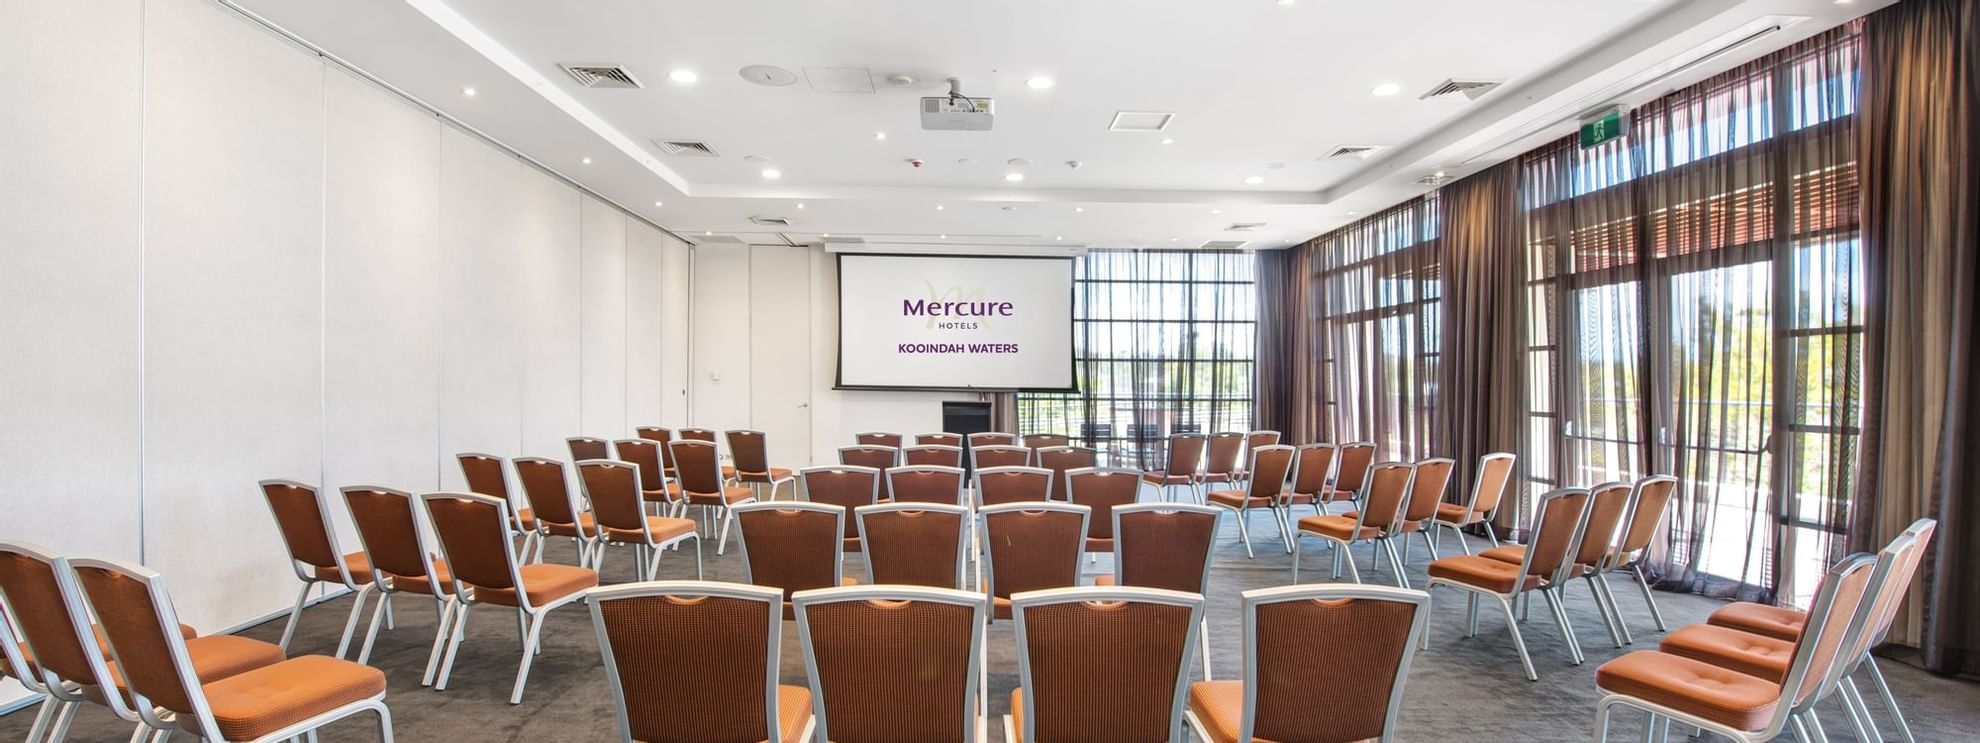 Light and airy conference room that can be used for meetings, events or weddings